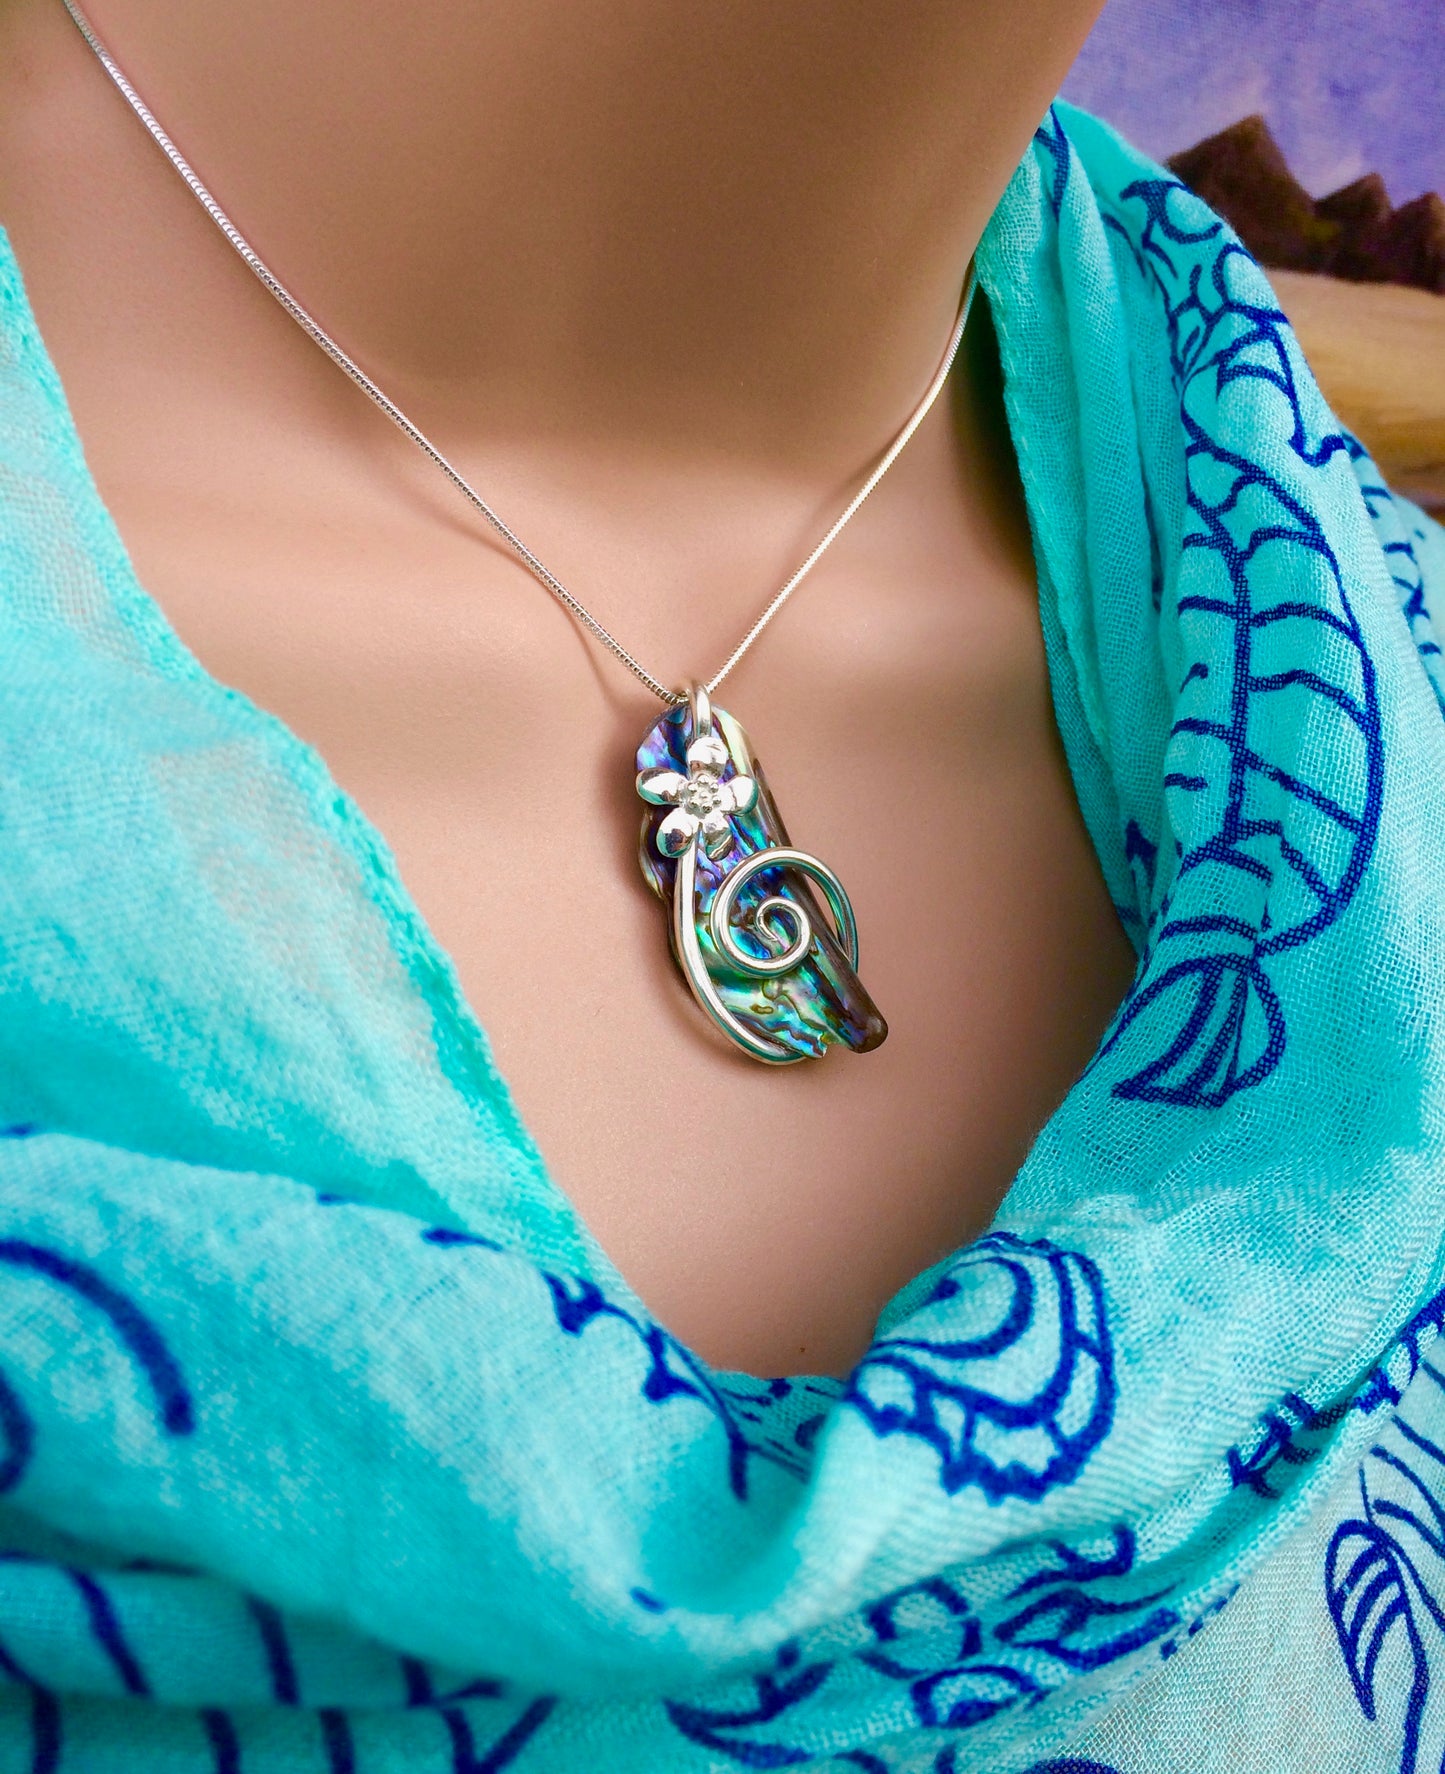 Abalone shell necklace with flower